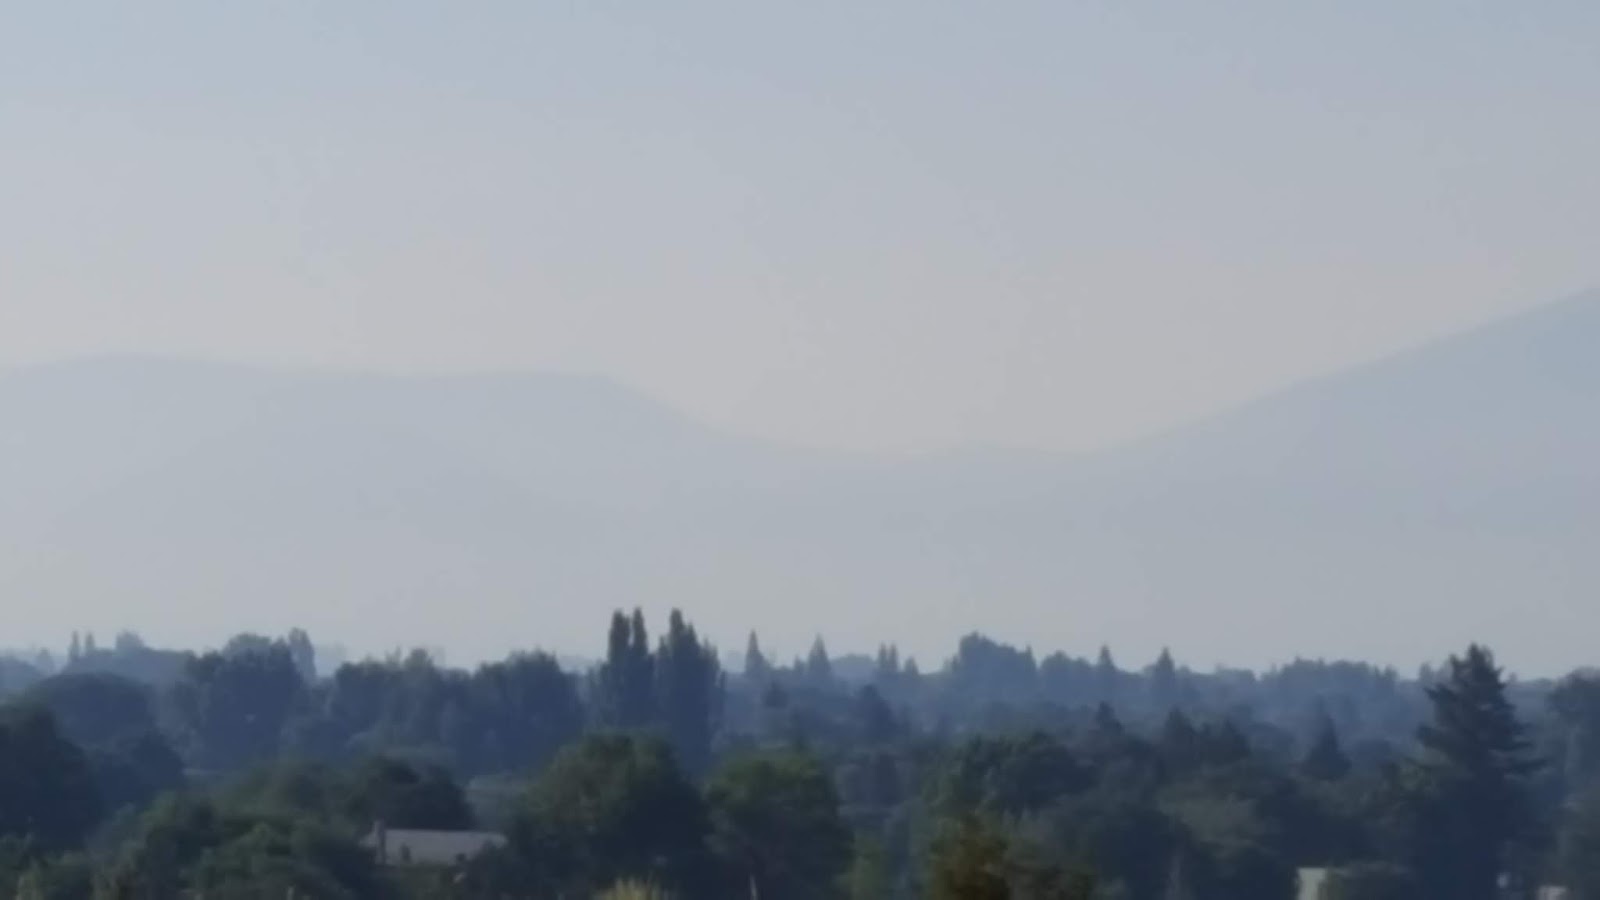 The Smoky View from Klamath Falls Today